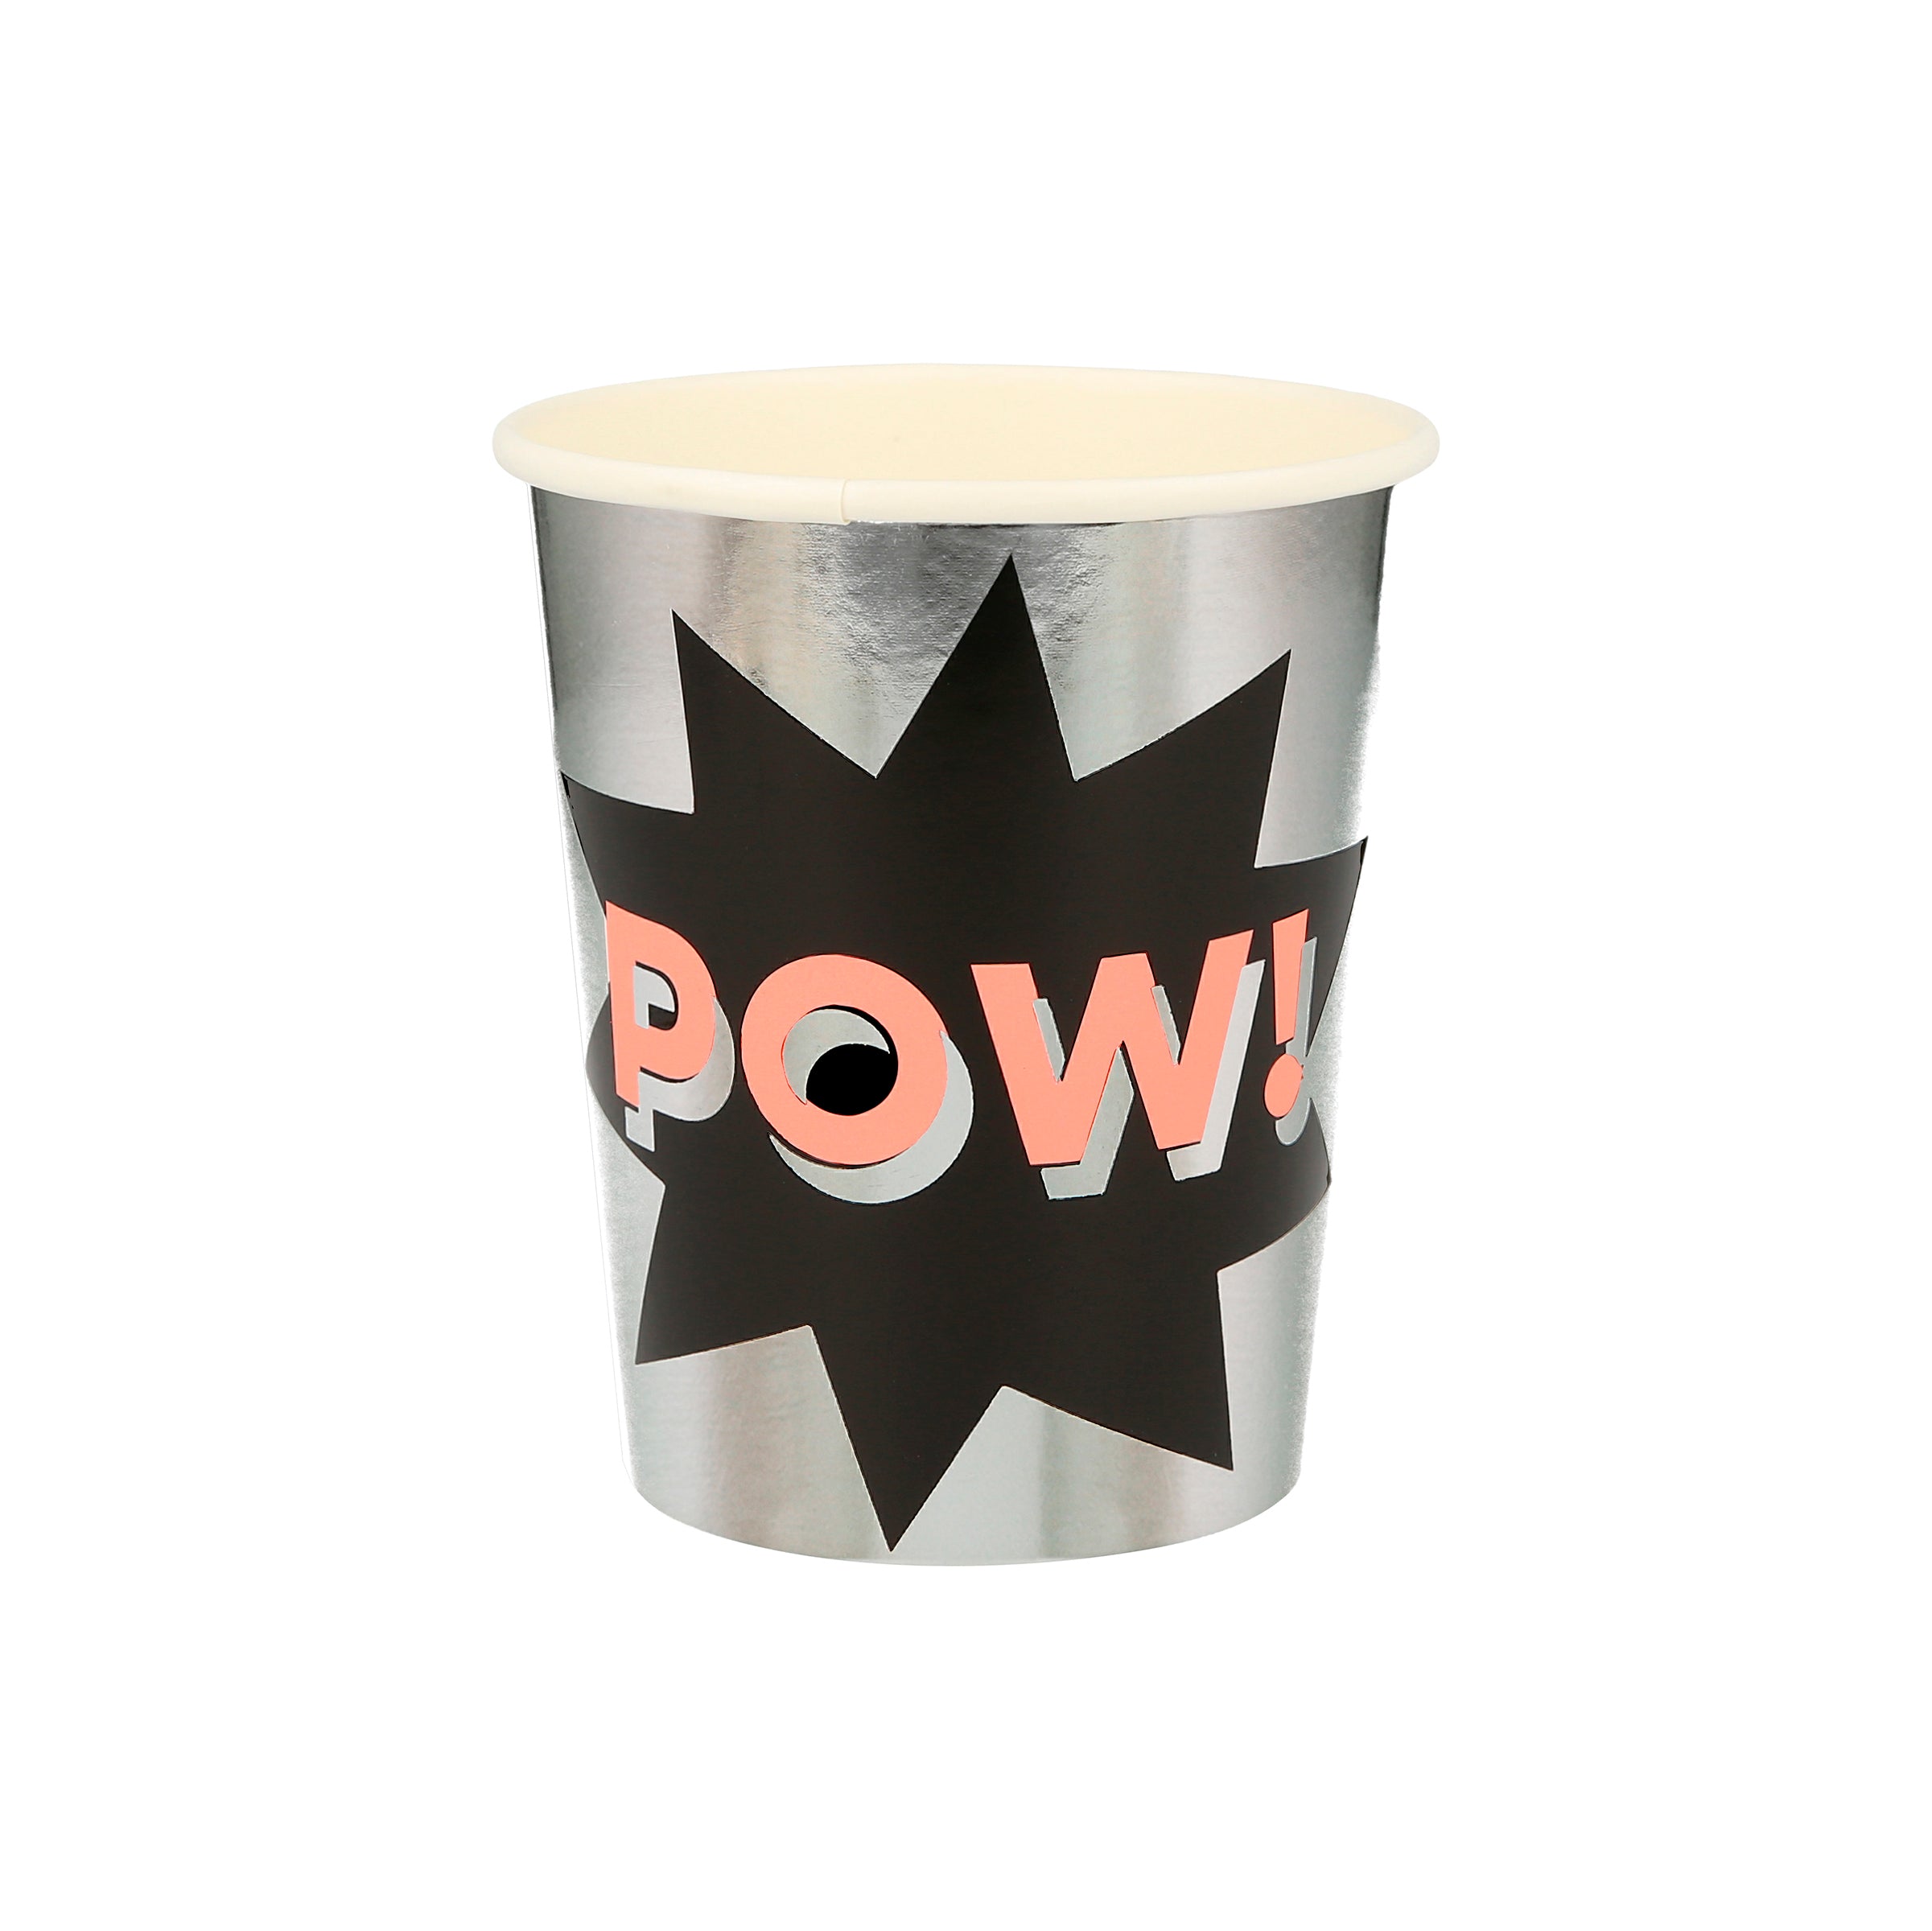 Our party cups, with comic book words, are ideal for a kids birthday party with a superhero theme.